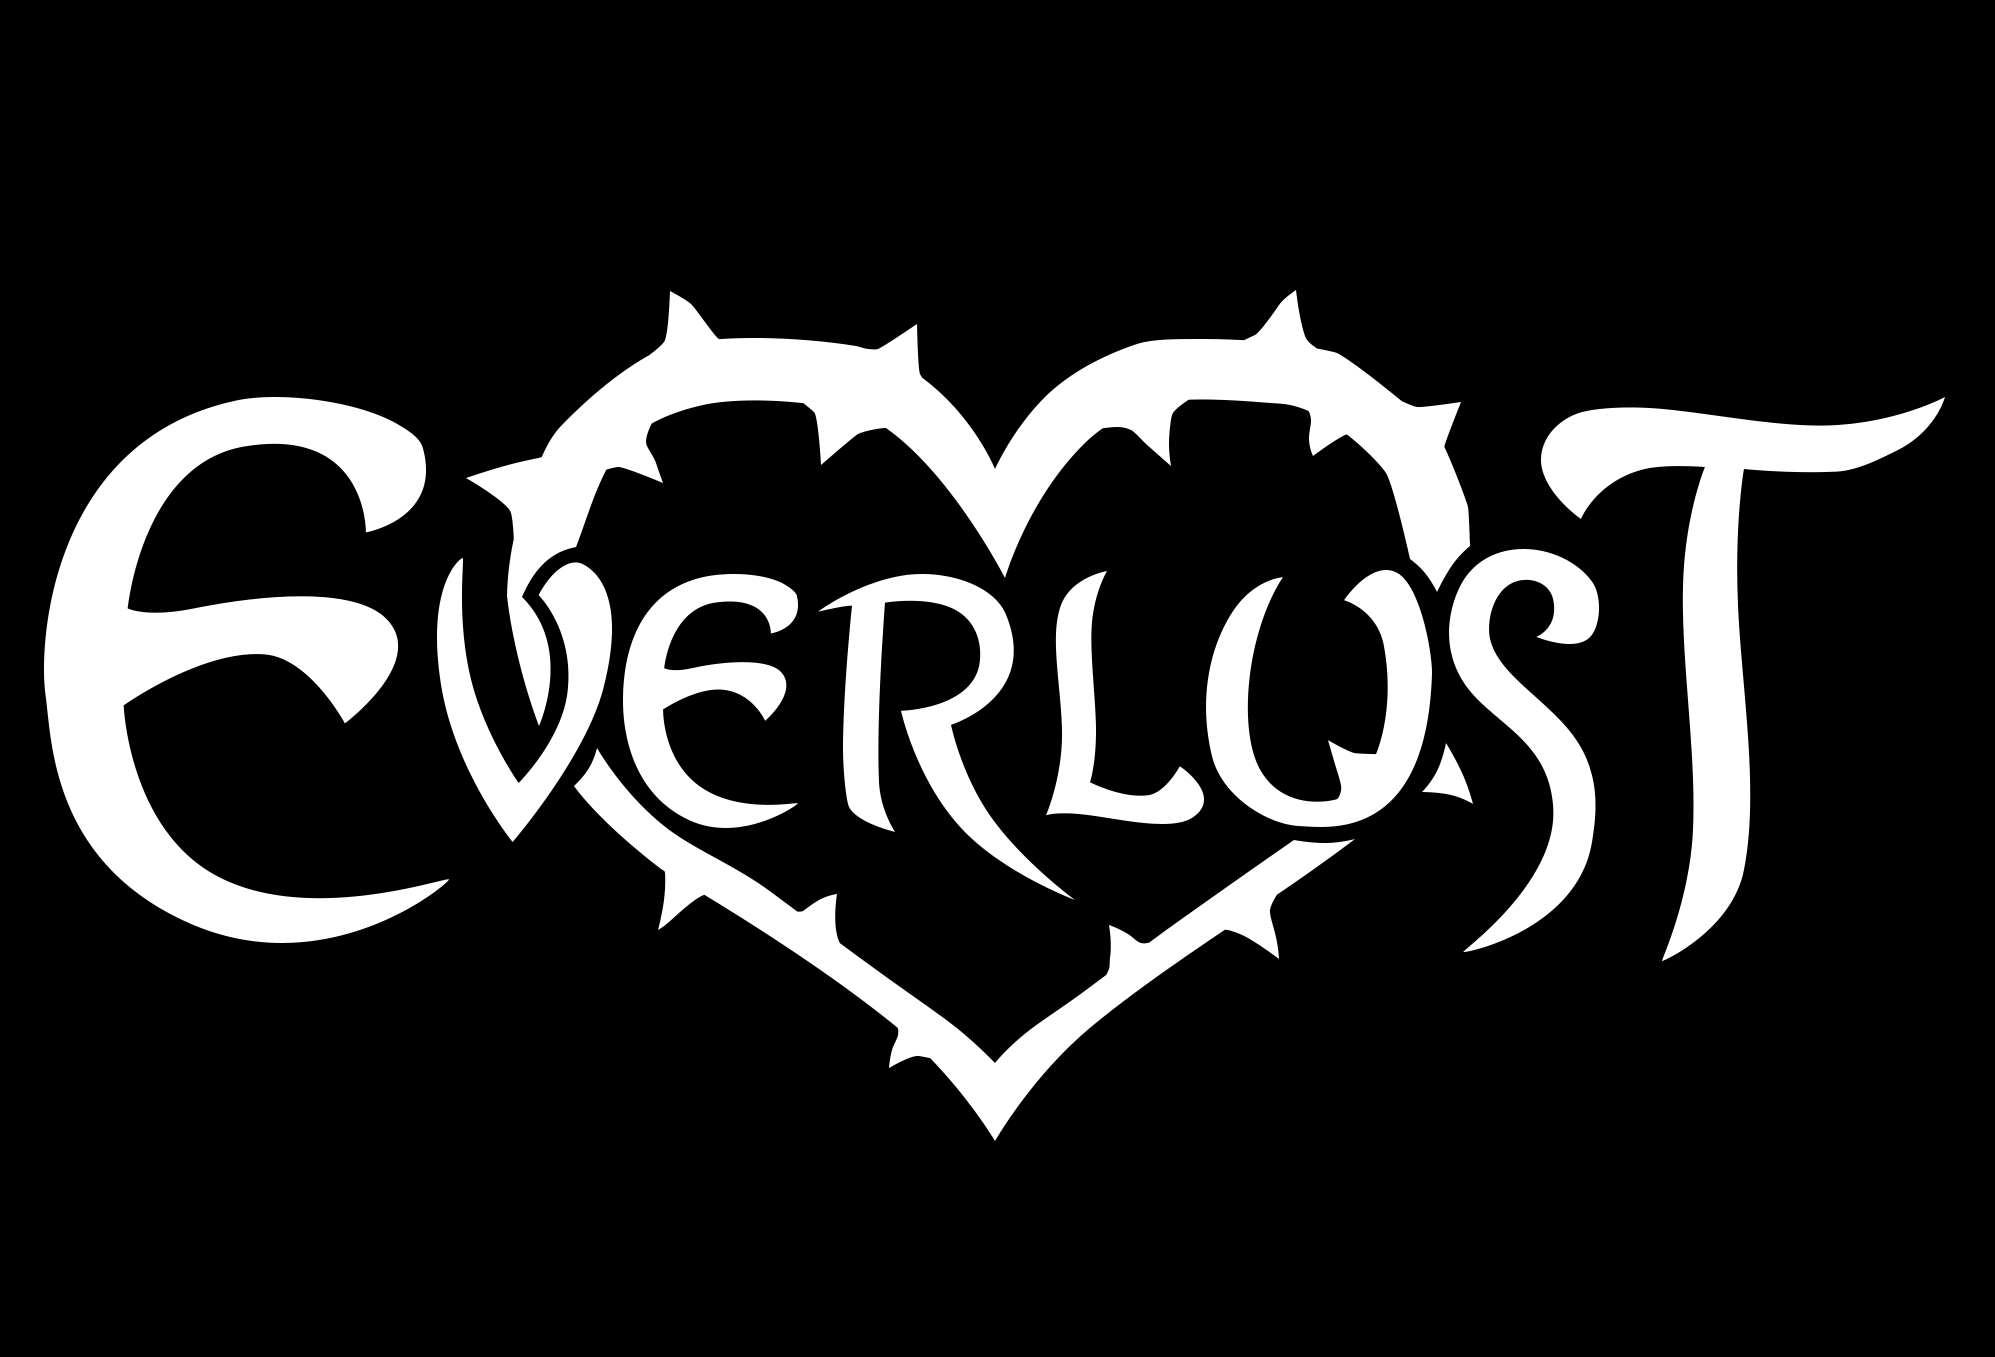 Gothic Metal / Rock Band EVERLUST Announce New EP “The Tale of the ...